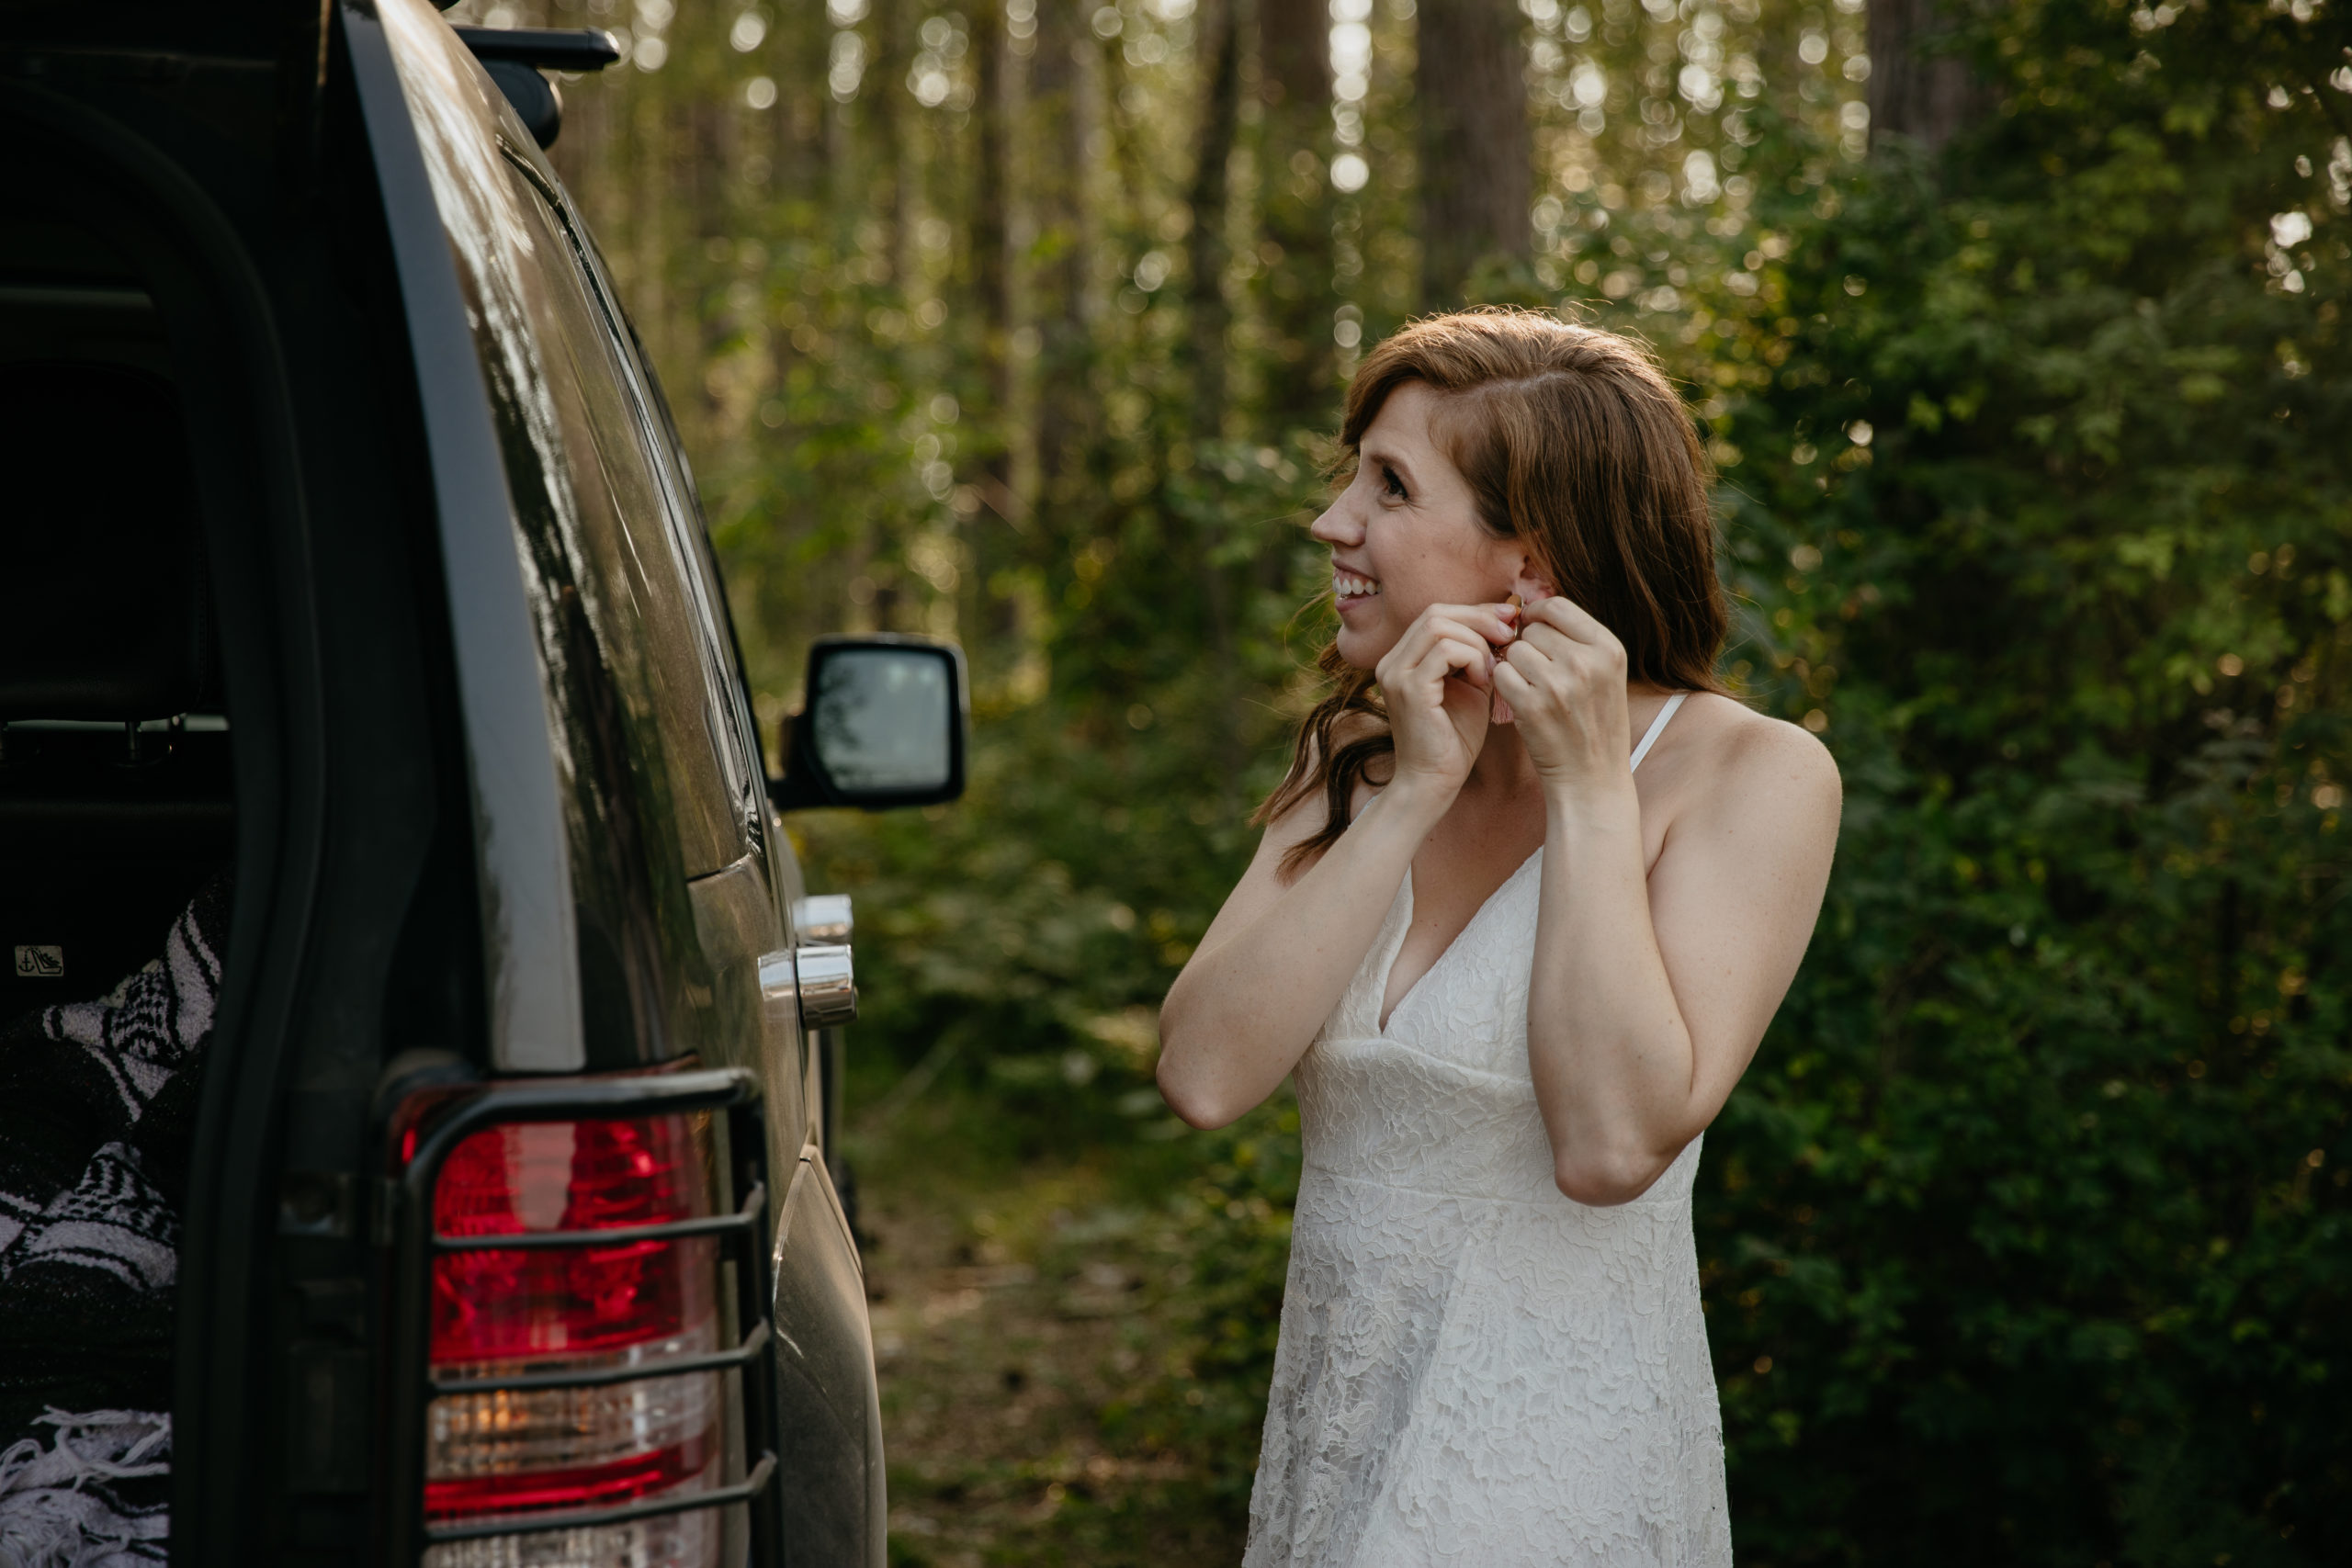 The bride putting on earrings before their forest elopement in Michigan